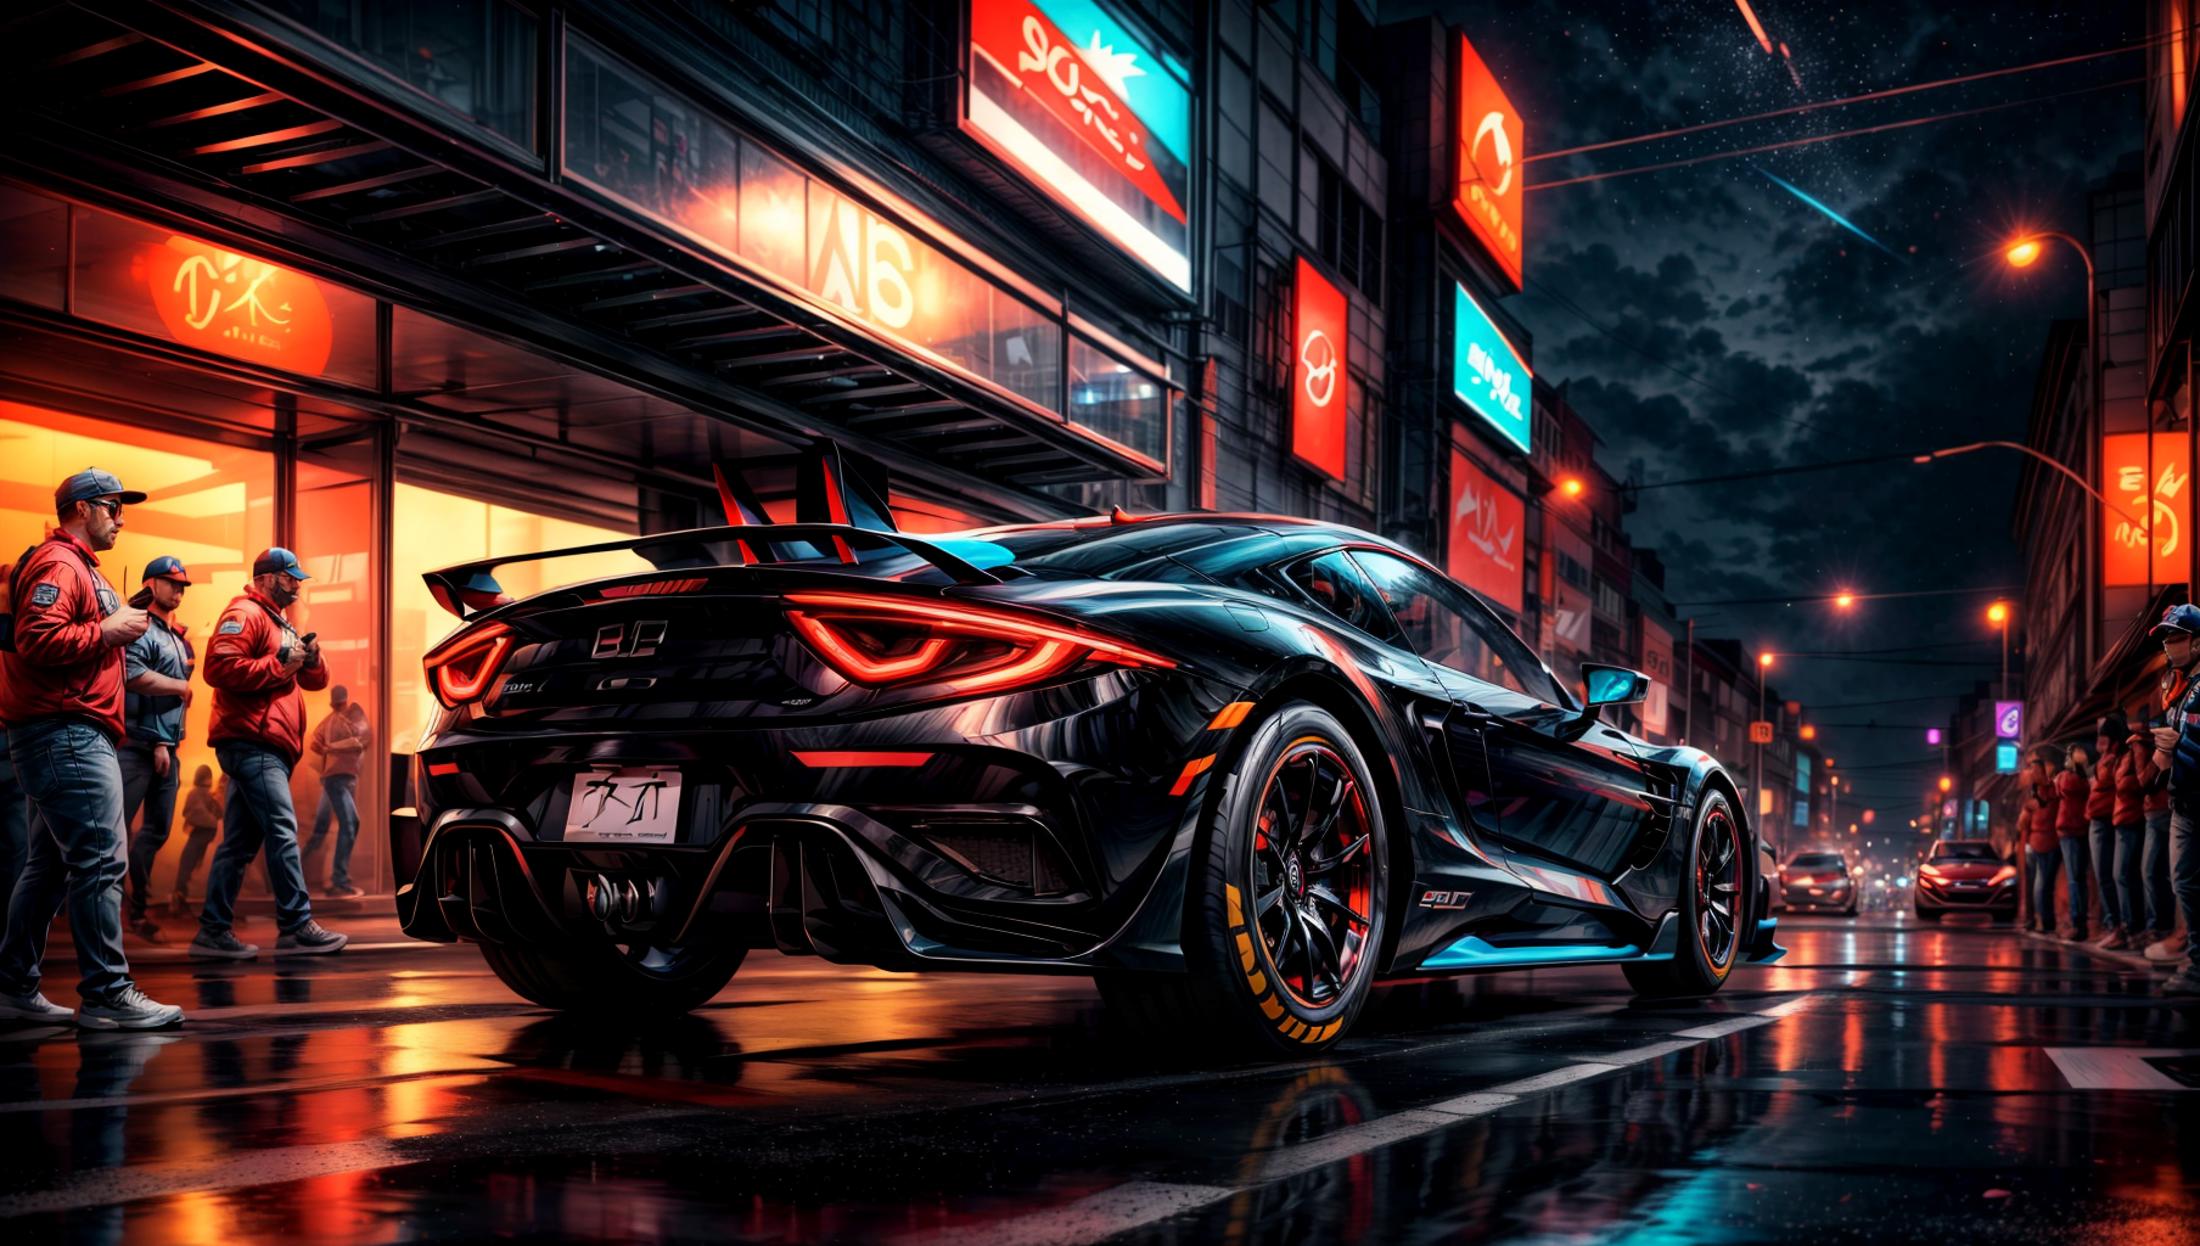 A black sports car on a city street with a neon sky background.